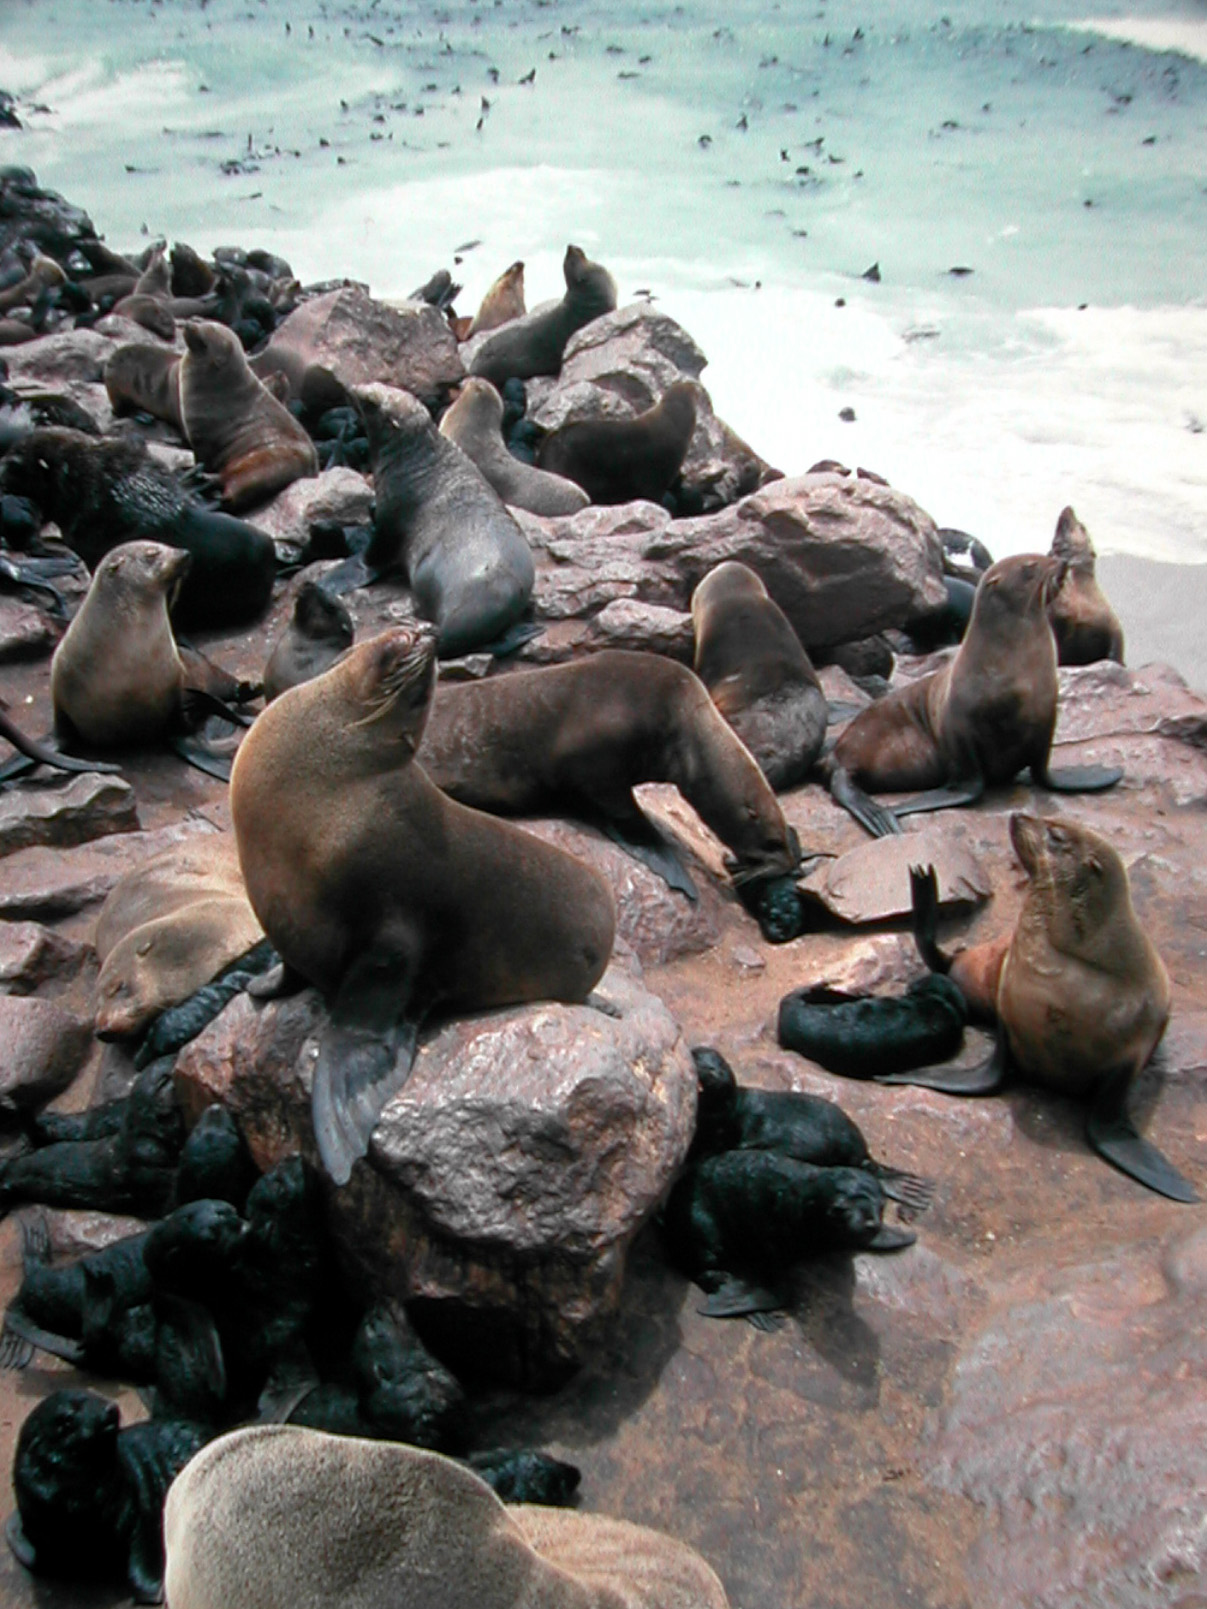 Mexico's fur seals are suffering from alopecia, International